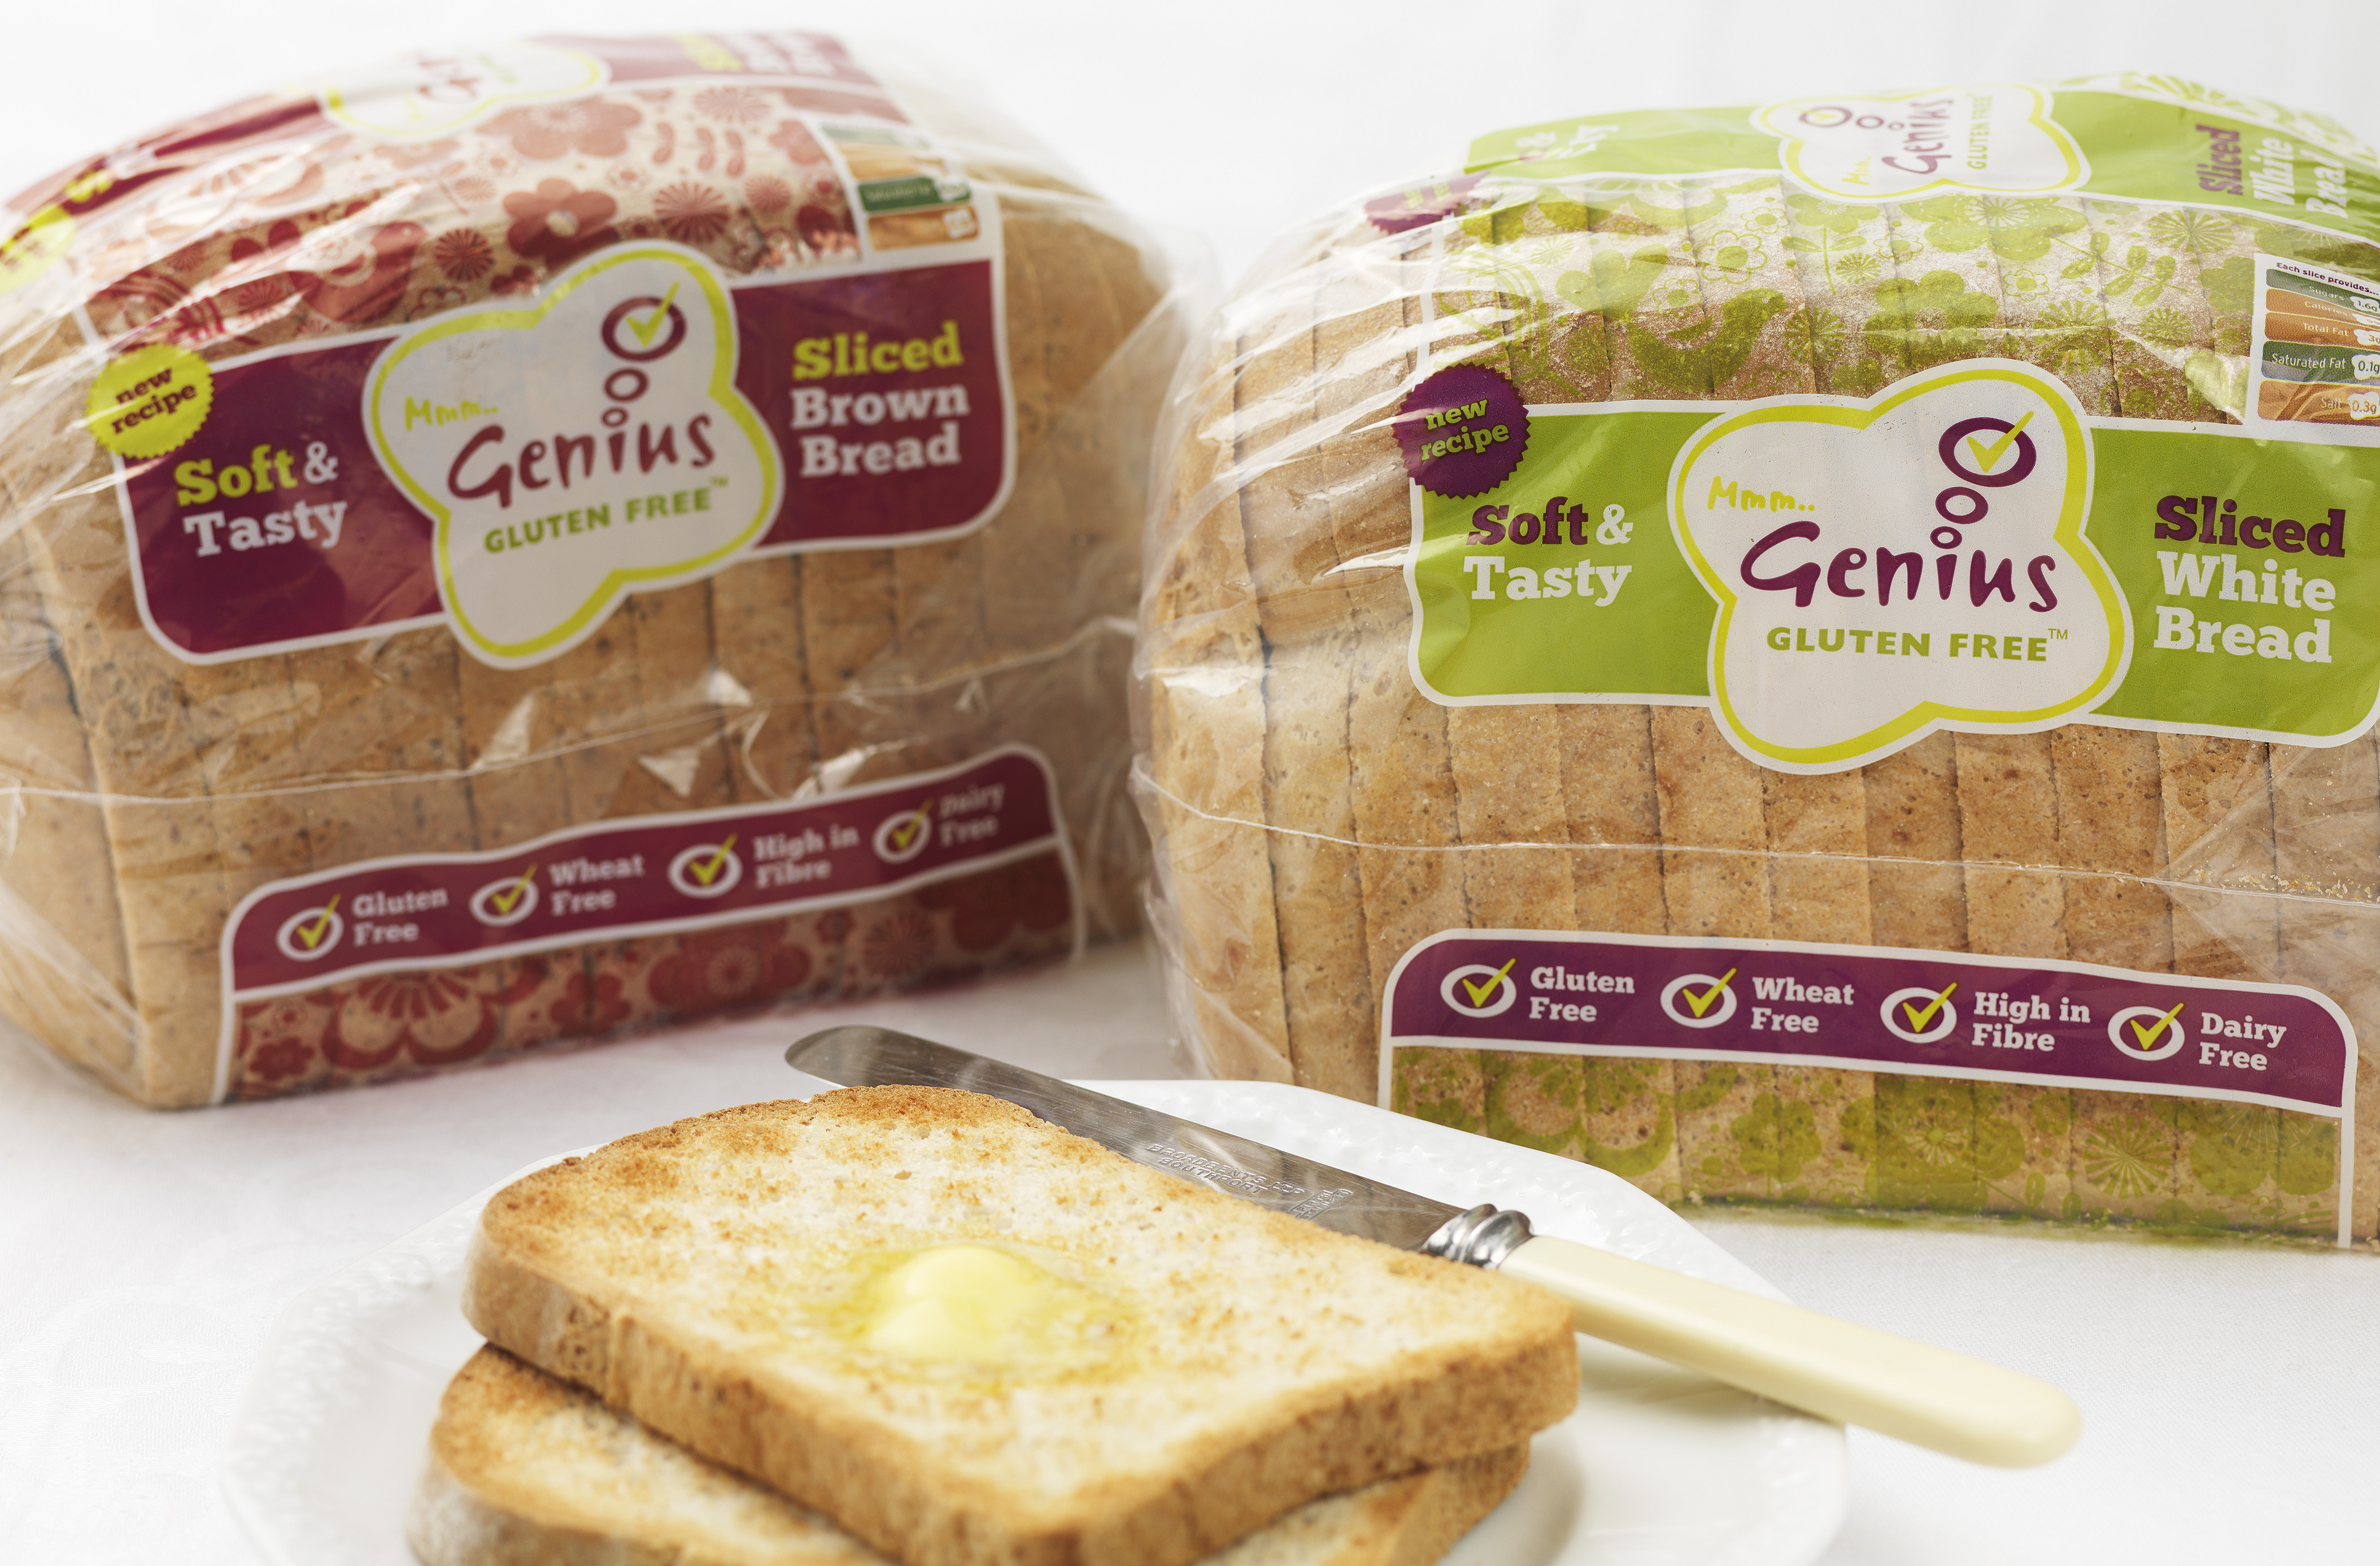 Where To Buy Gluten Free Bread
 What’s in a Gluten Free Brand